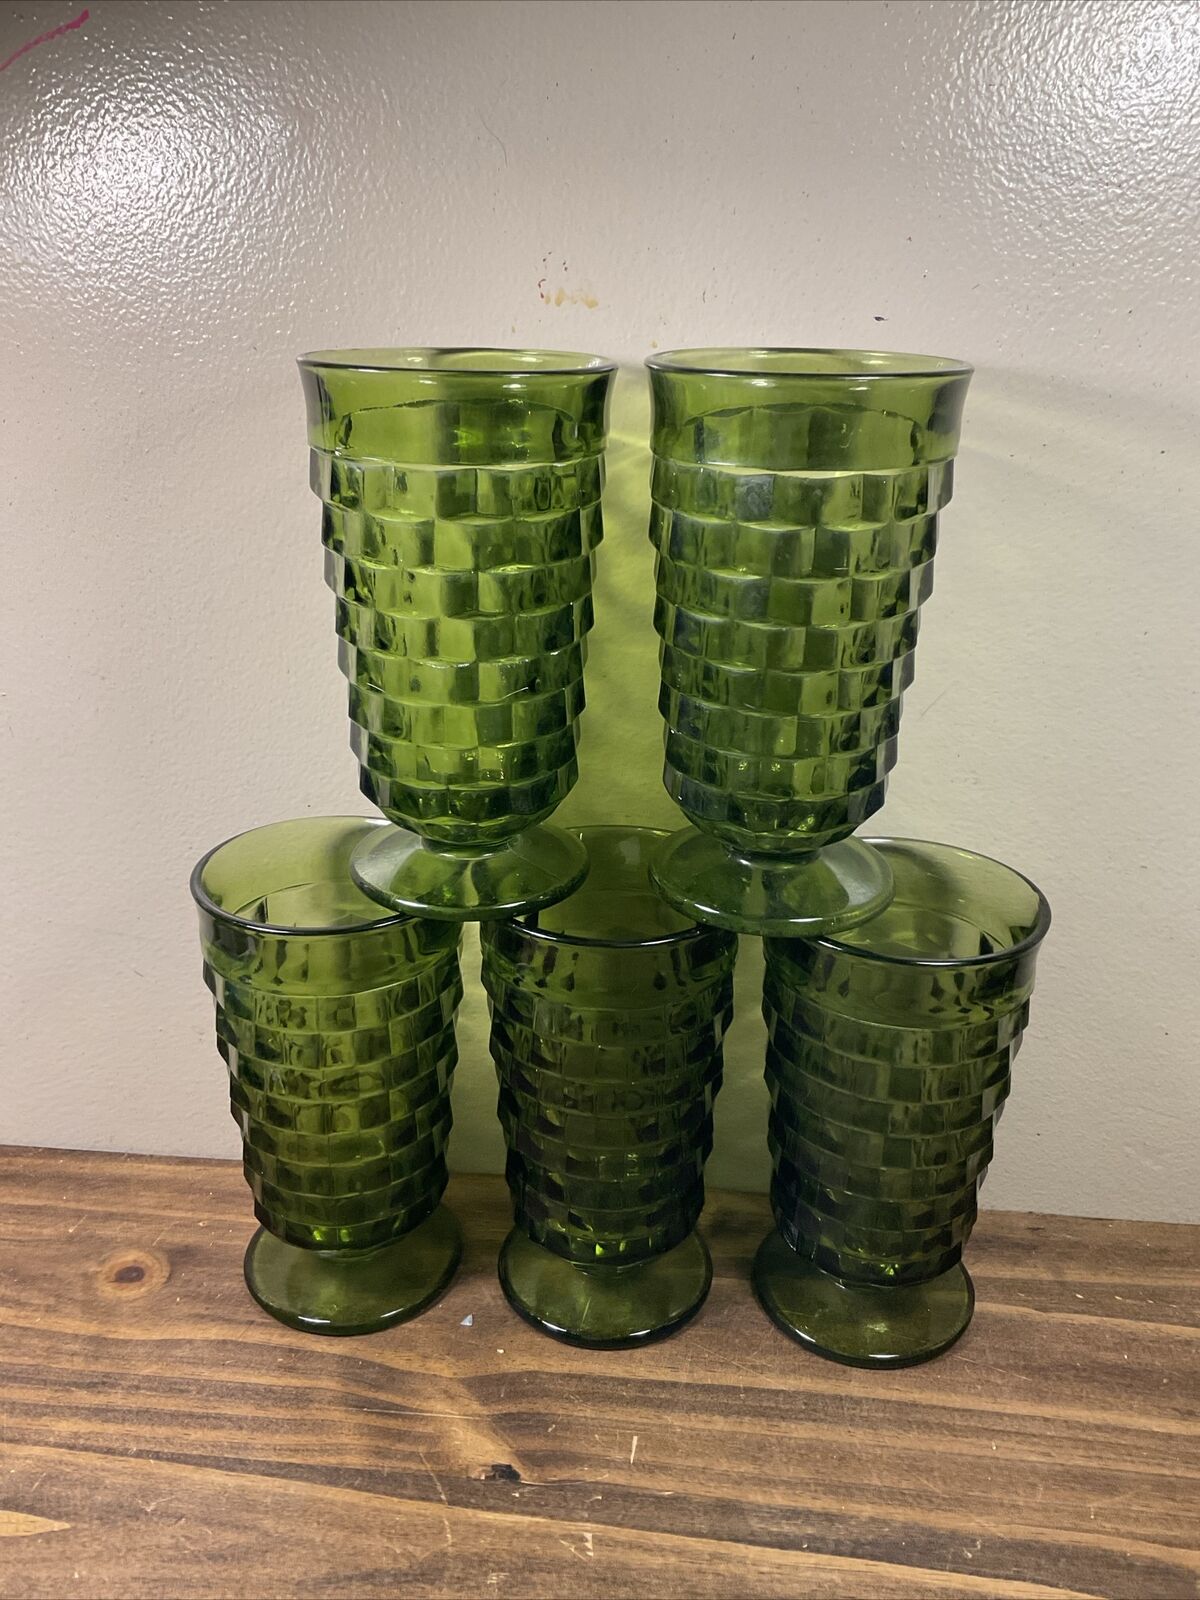 Indiana Glass Whitehall Green Cubist Footed Drinking Glasses 5 12 oz. Tumbler